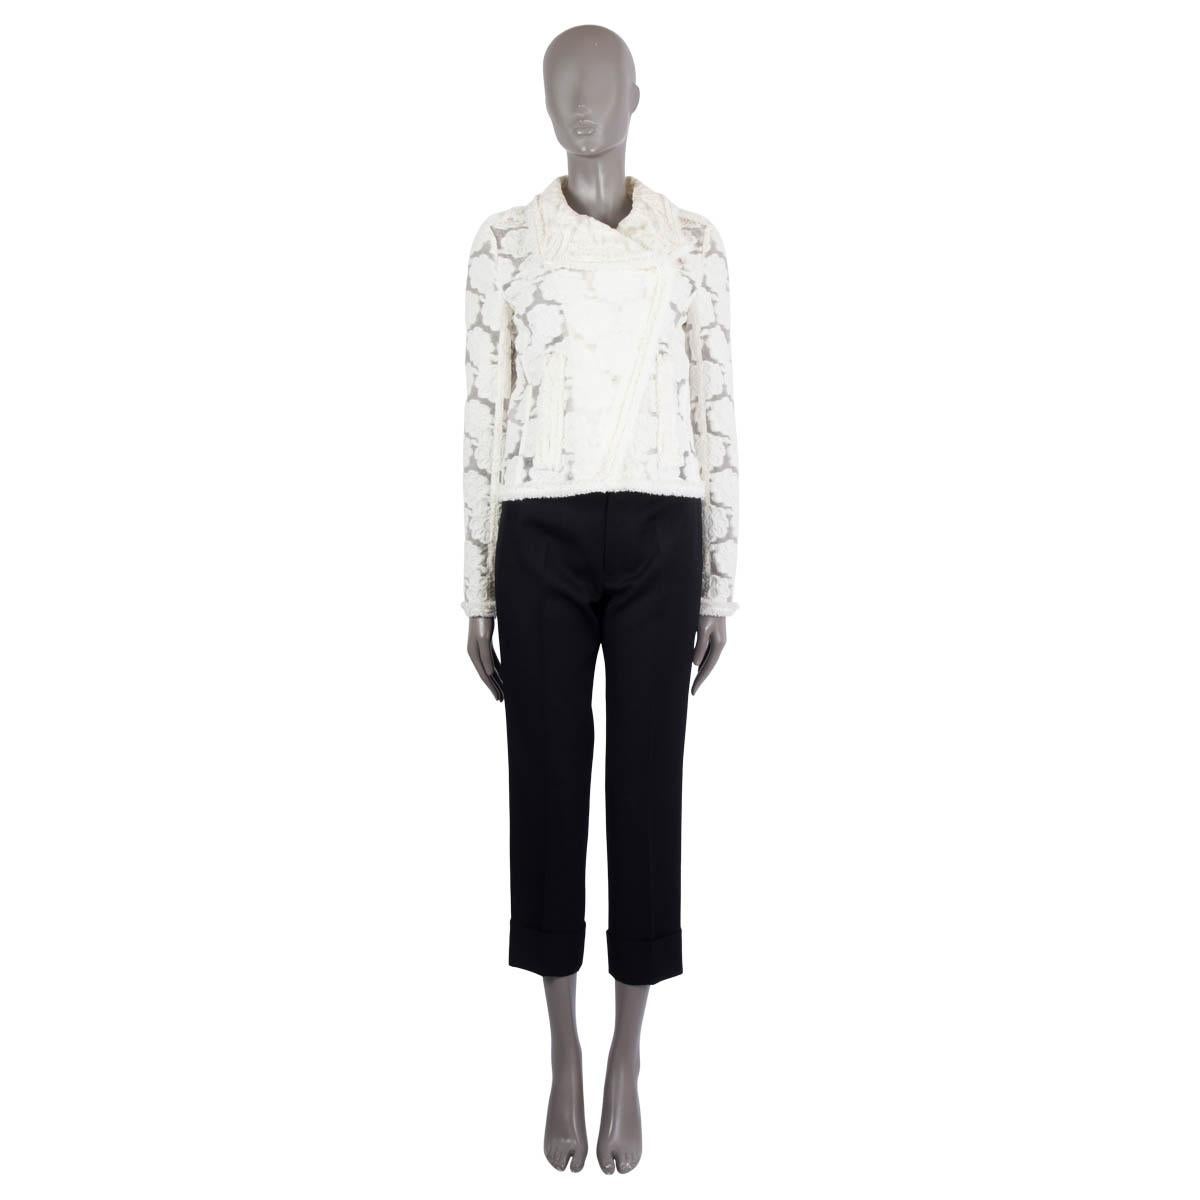 100% authentic Chanel sheer camellia biker jacket in ivory cotton (52%) and nylon (48%). Features epaulettes with enameled buttons, two zipper pockets on the front, fringed trims and clear polyurathene inset on the epaulettes and under the collar.